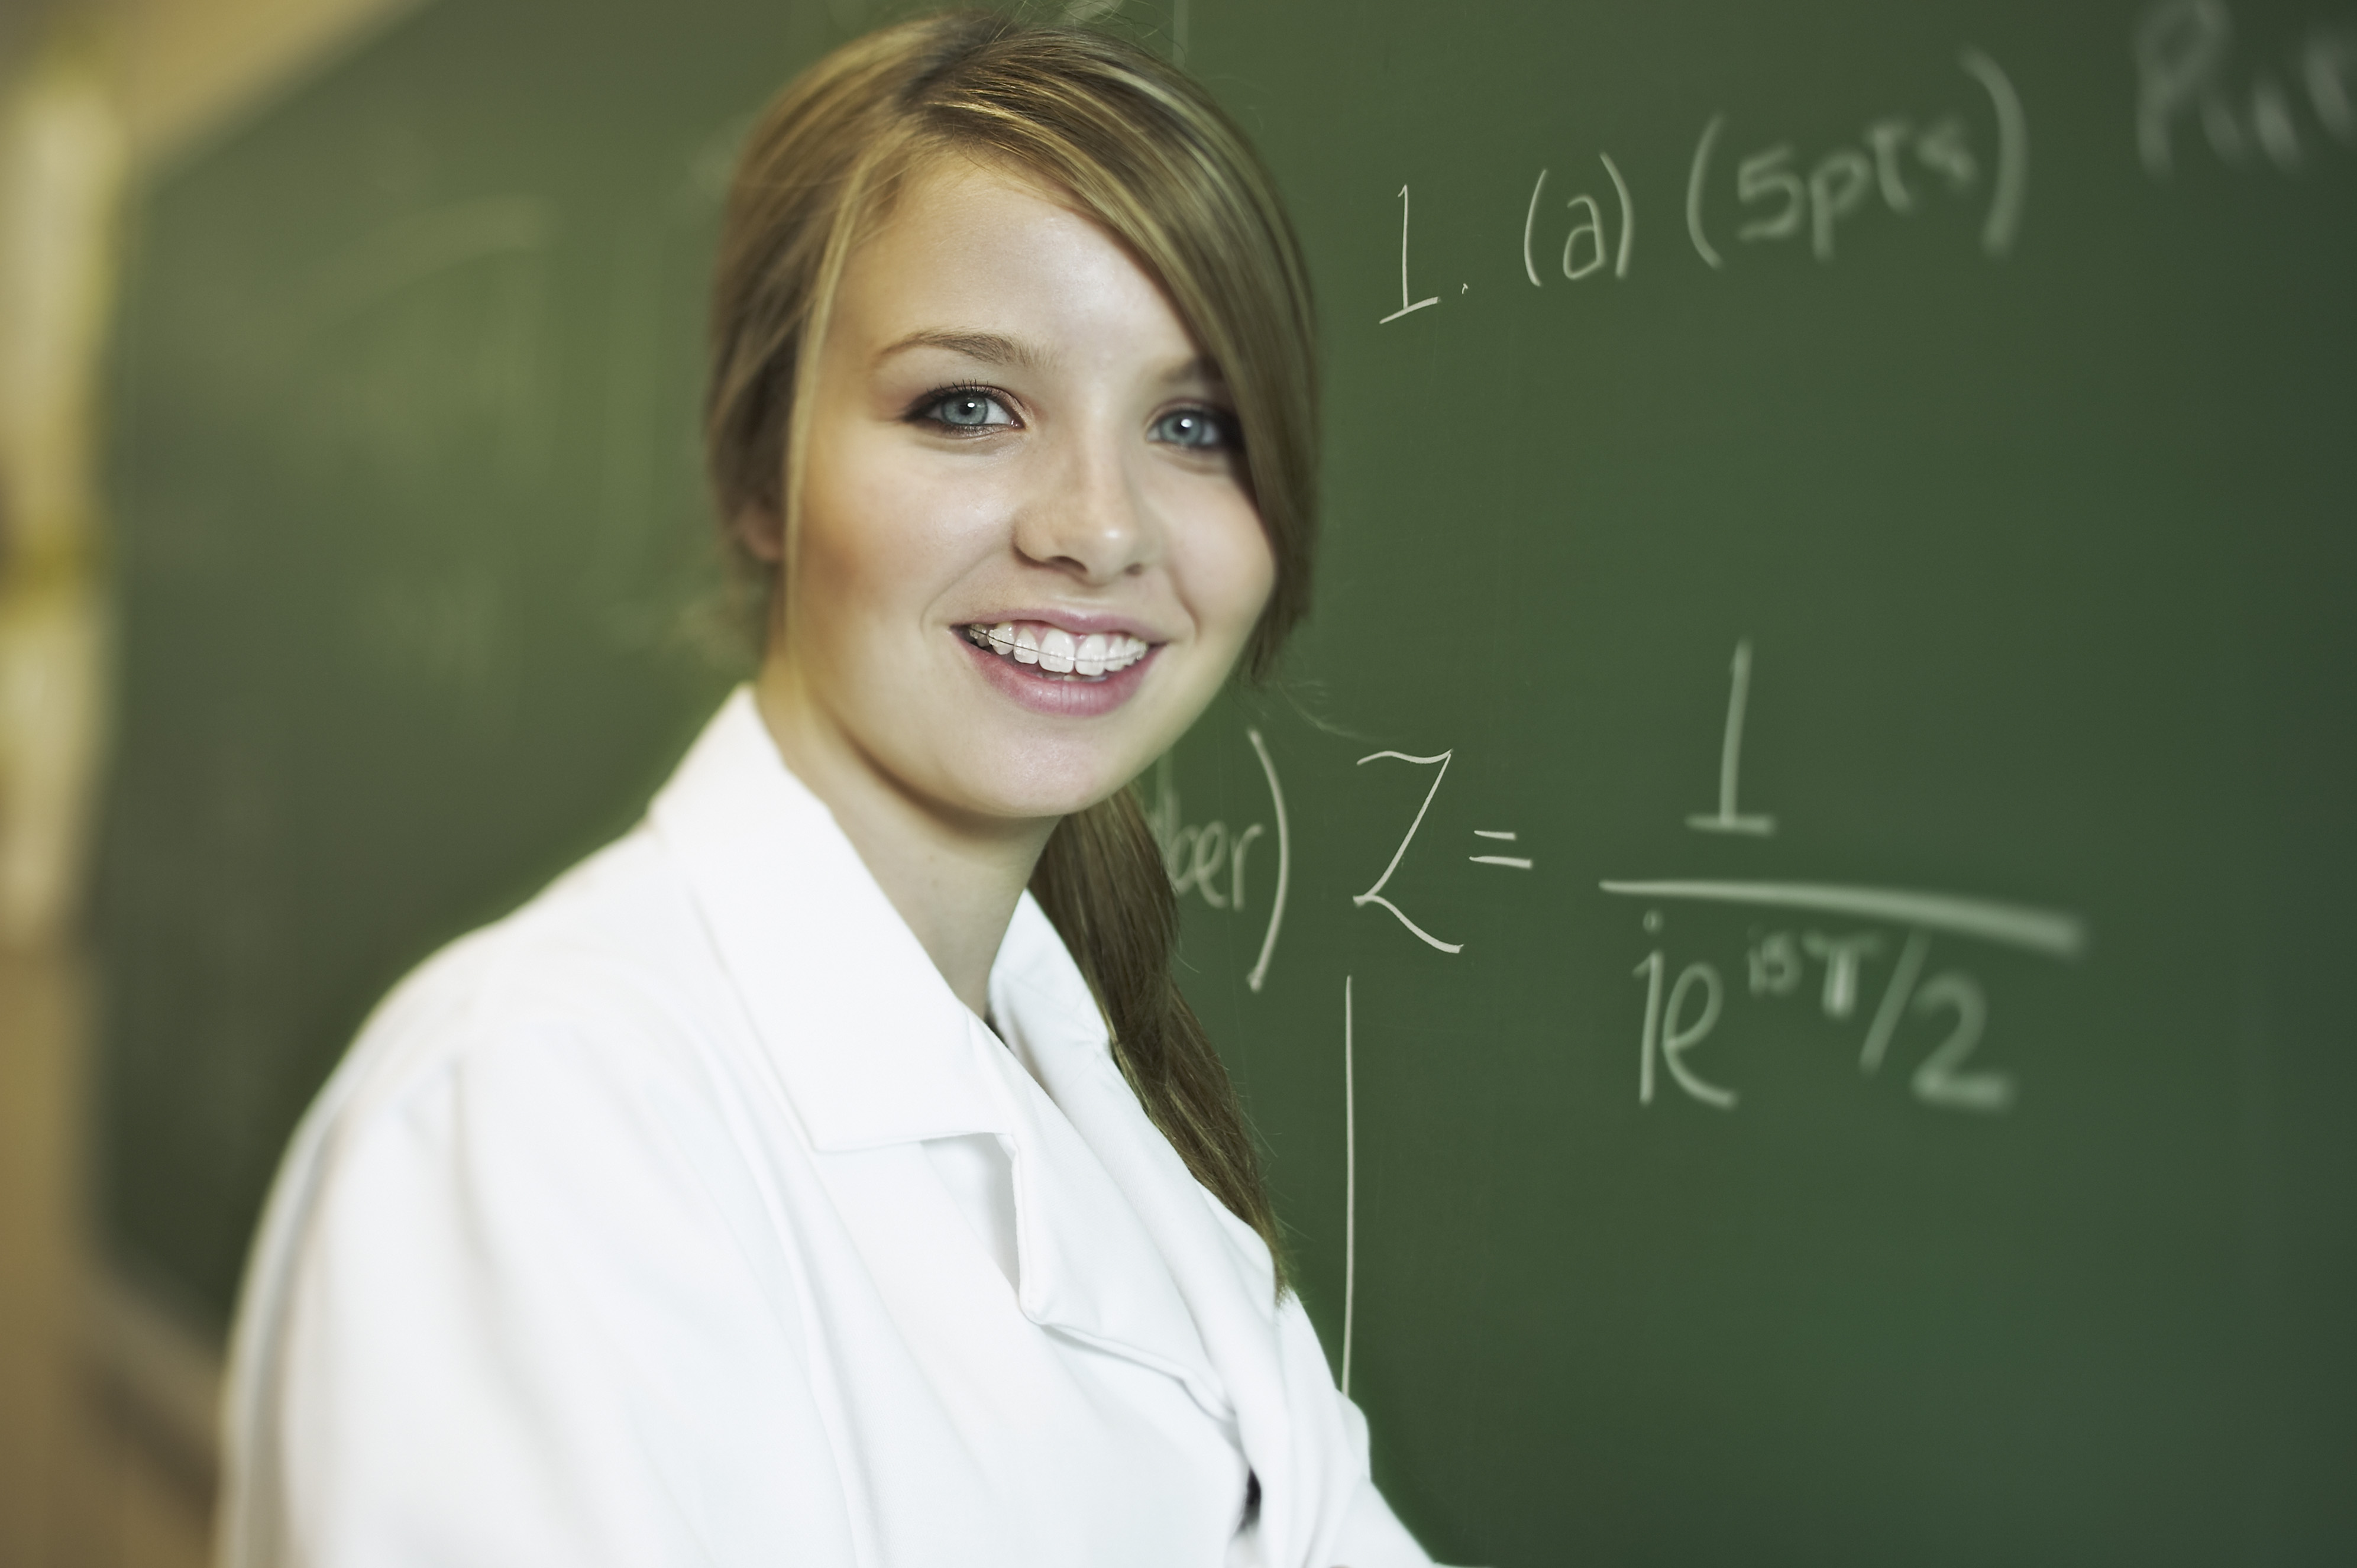 Smiling teenage girl standing in front of chalkboard